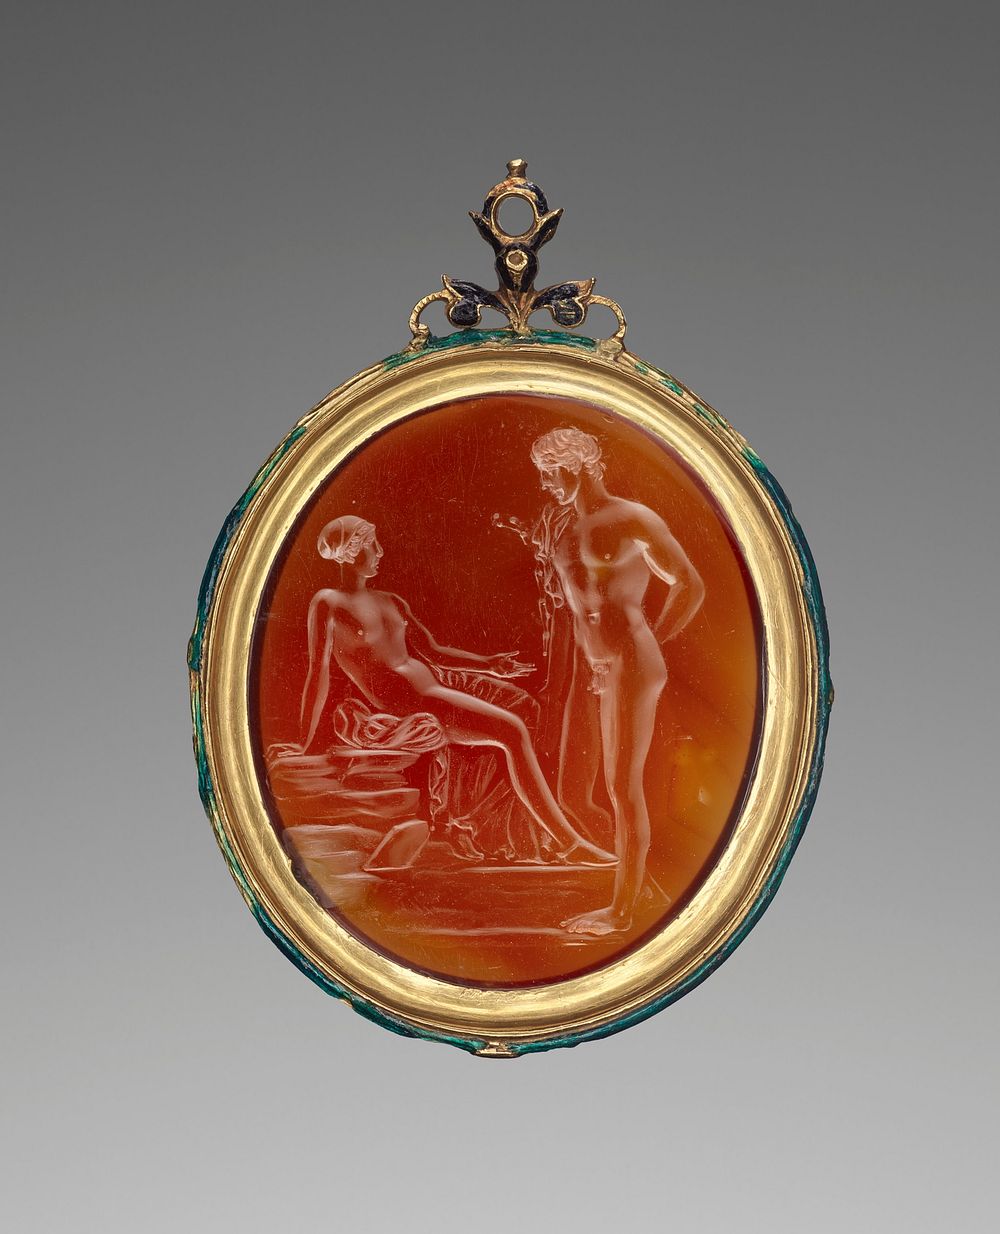 Gem with Venus and Anchises